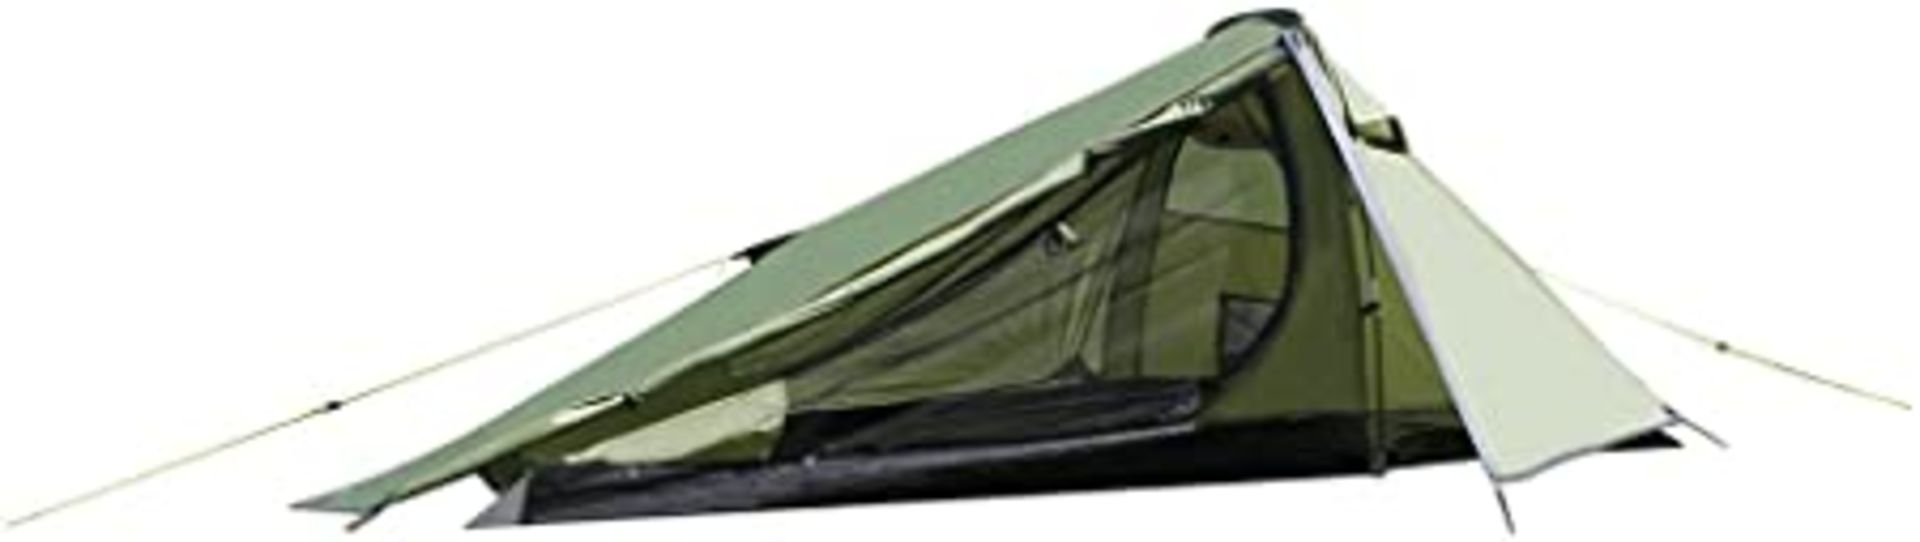 BAGGED YELLOWSTONE MATTERHORN UNISEX OUTDOOR TENT RRP £49.99Condition ReportAppraisal Available on